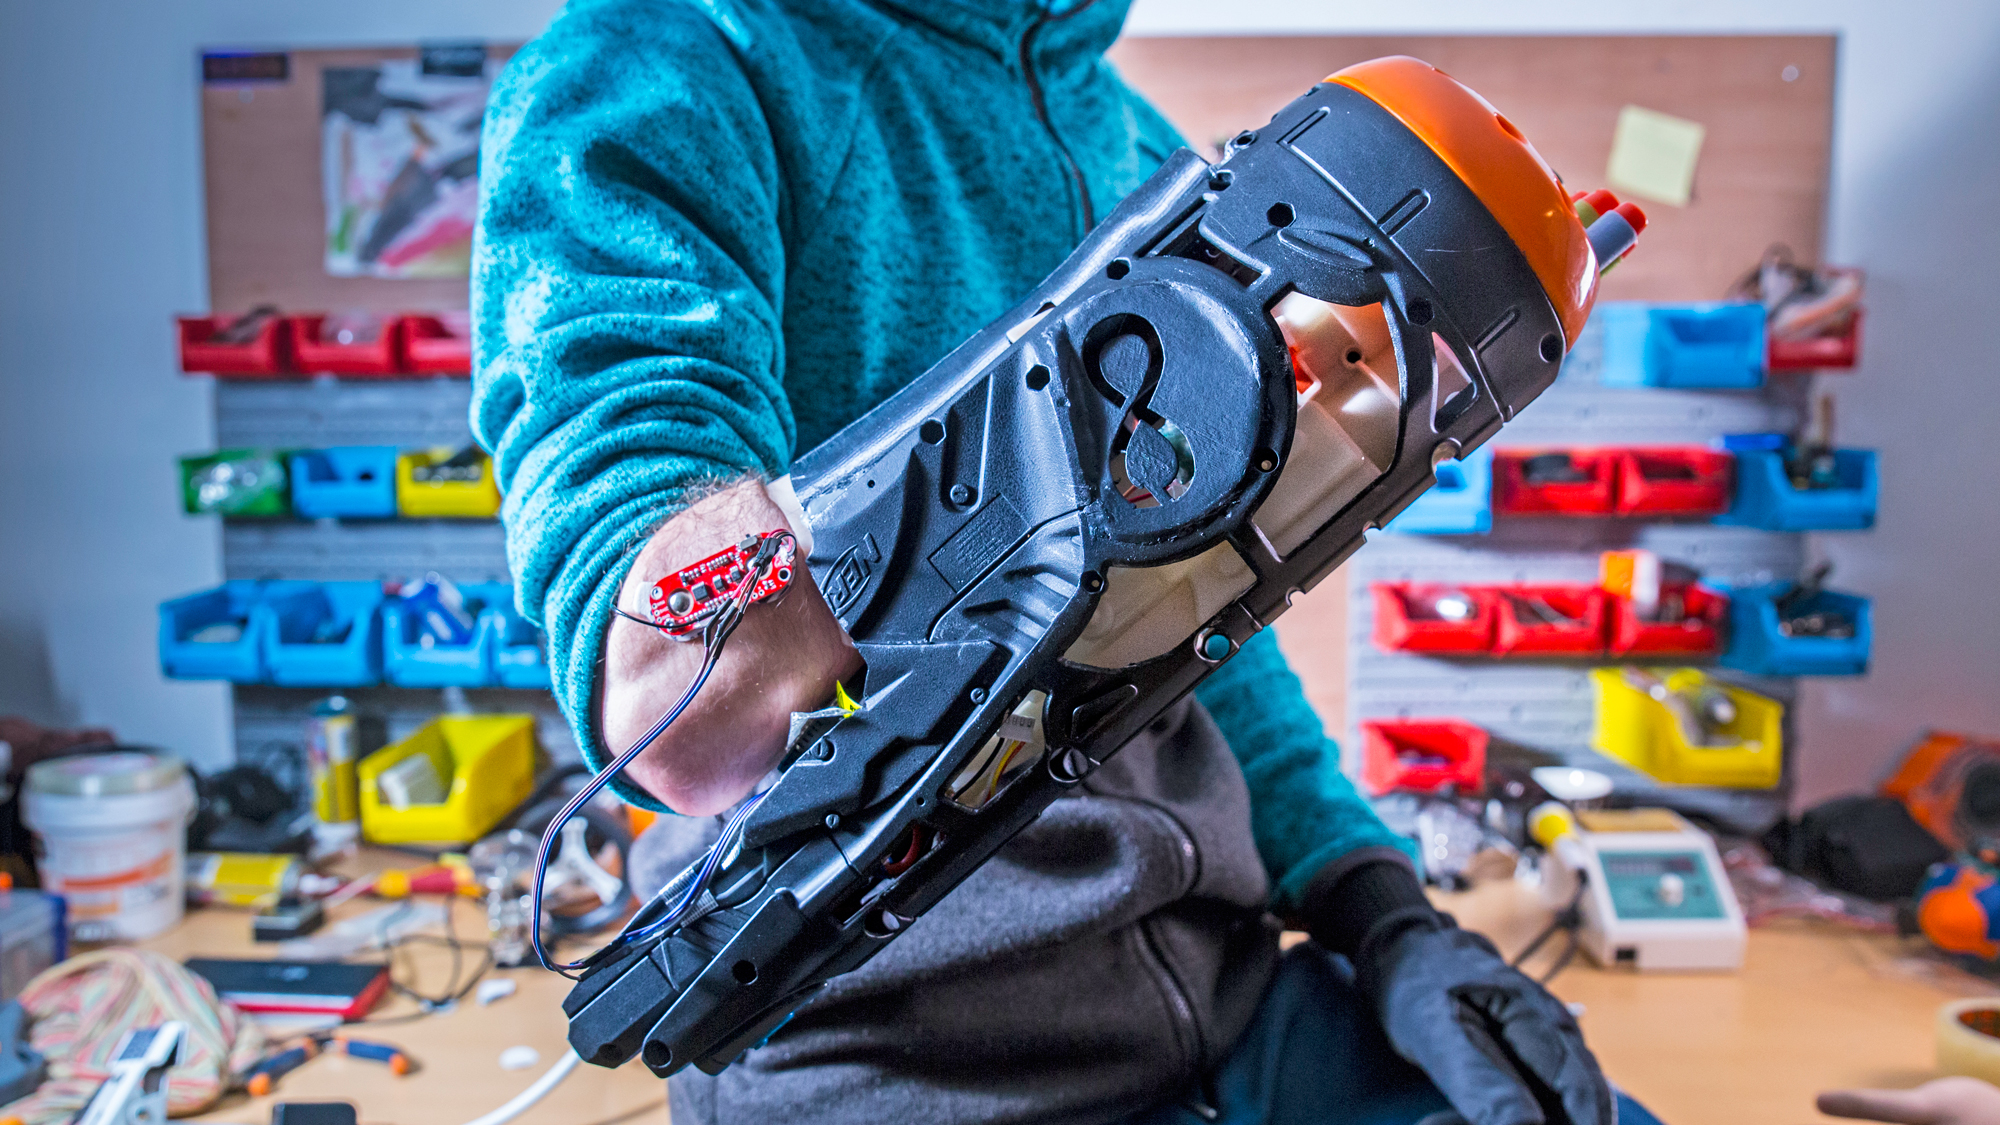 These Hackers Built A Prosthetic Nerf Blaster That Can Be Fired By Flexing Arm Muscles